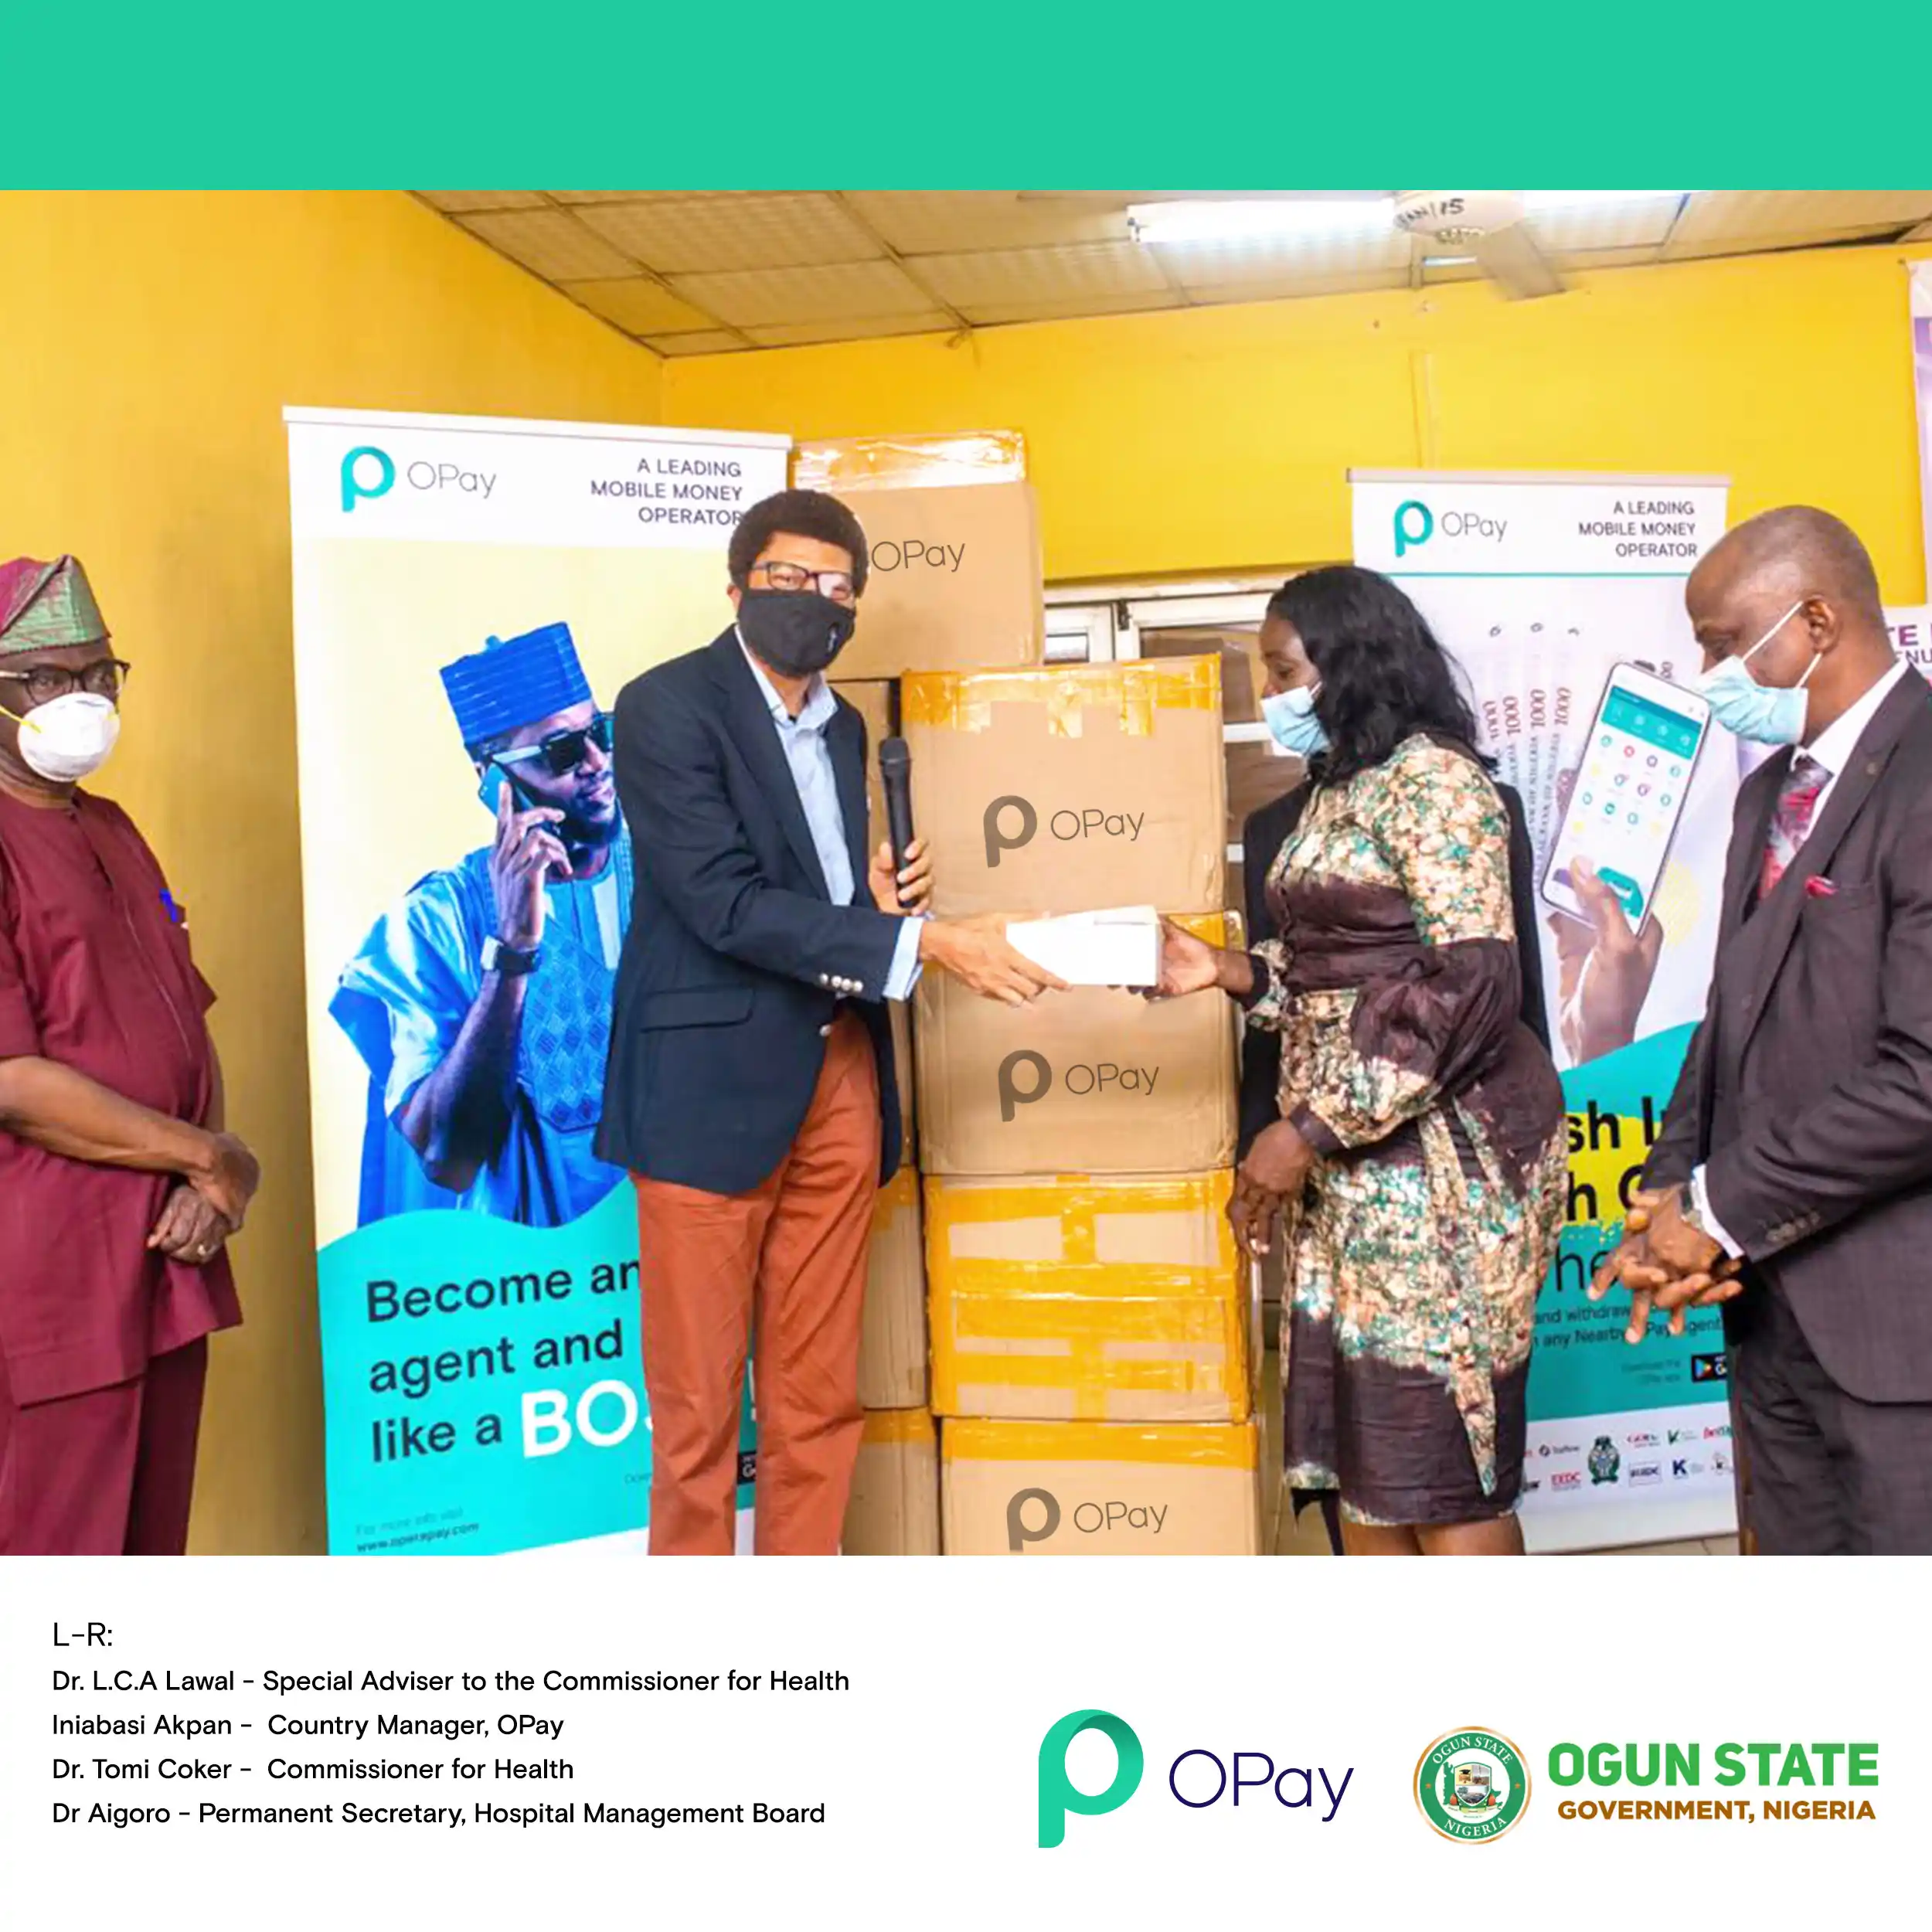 OPay Donates 300,000 Face Masks To Support Fight Against Spread of COVID-19 In Nigeria